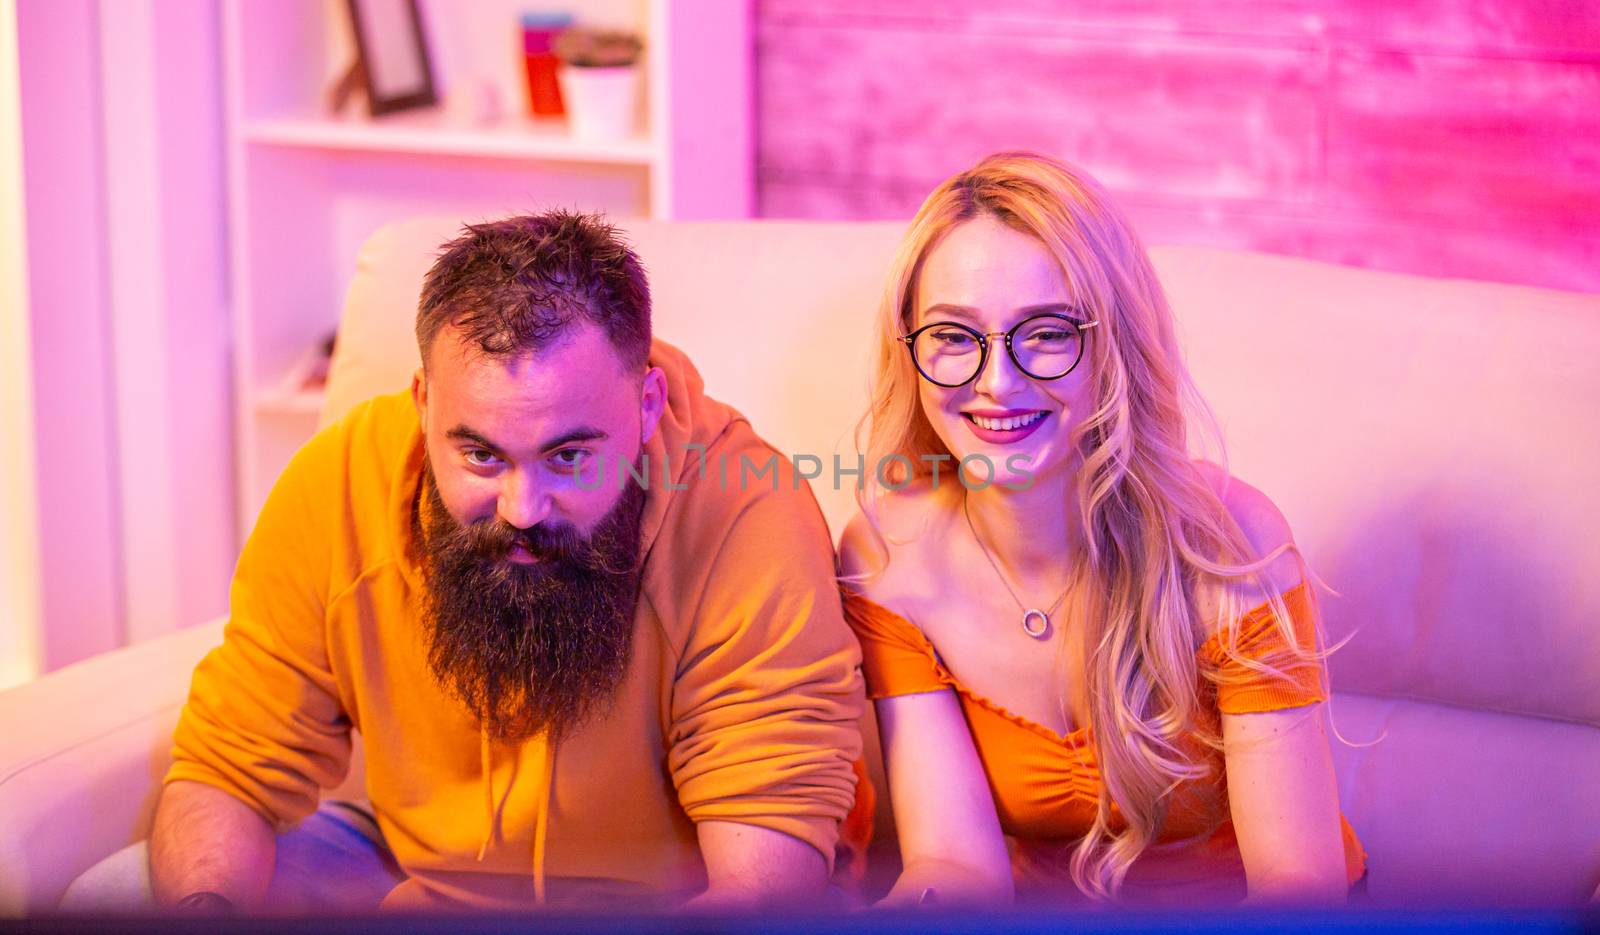 Beautiful blonde girl smiling while playing video games by DCStudio